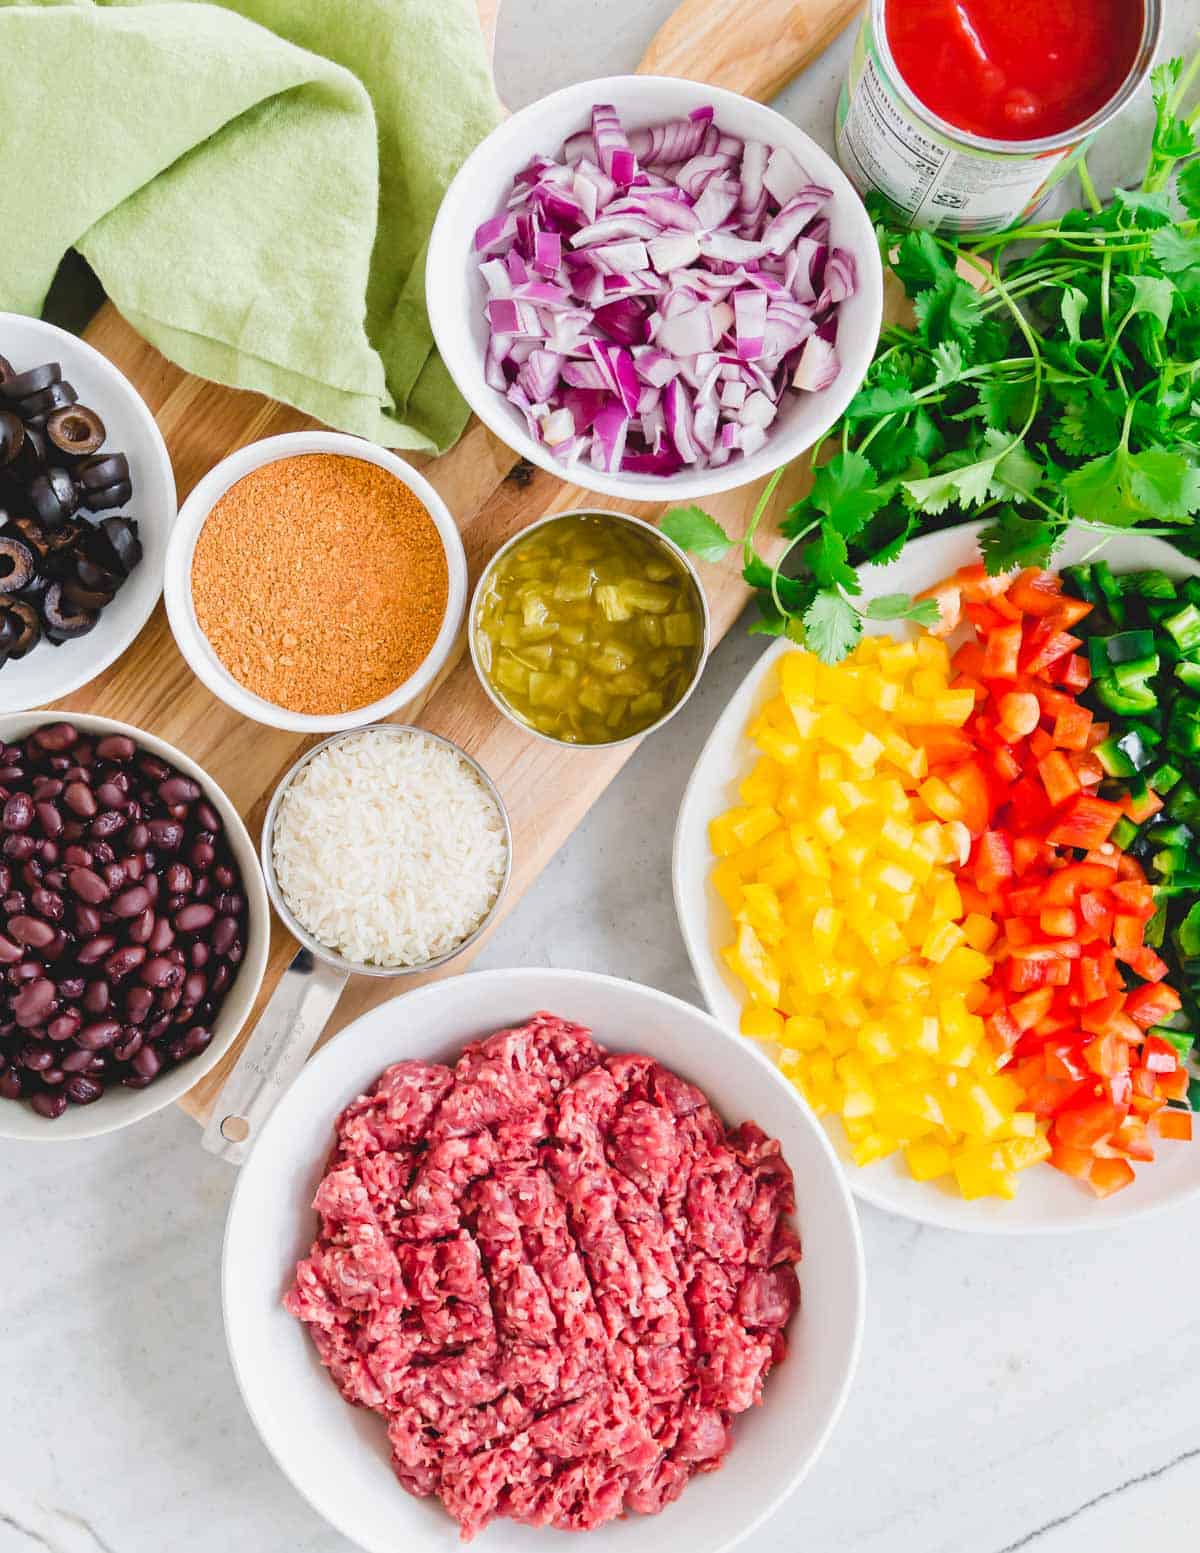 Ingredients to make a Mexican ground beef recipe in a skillet.